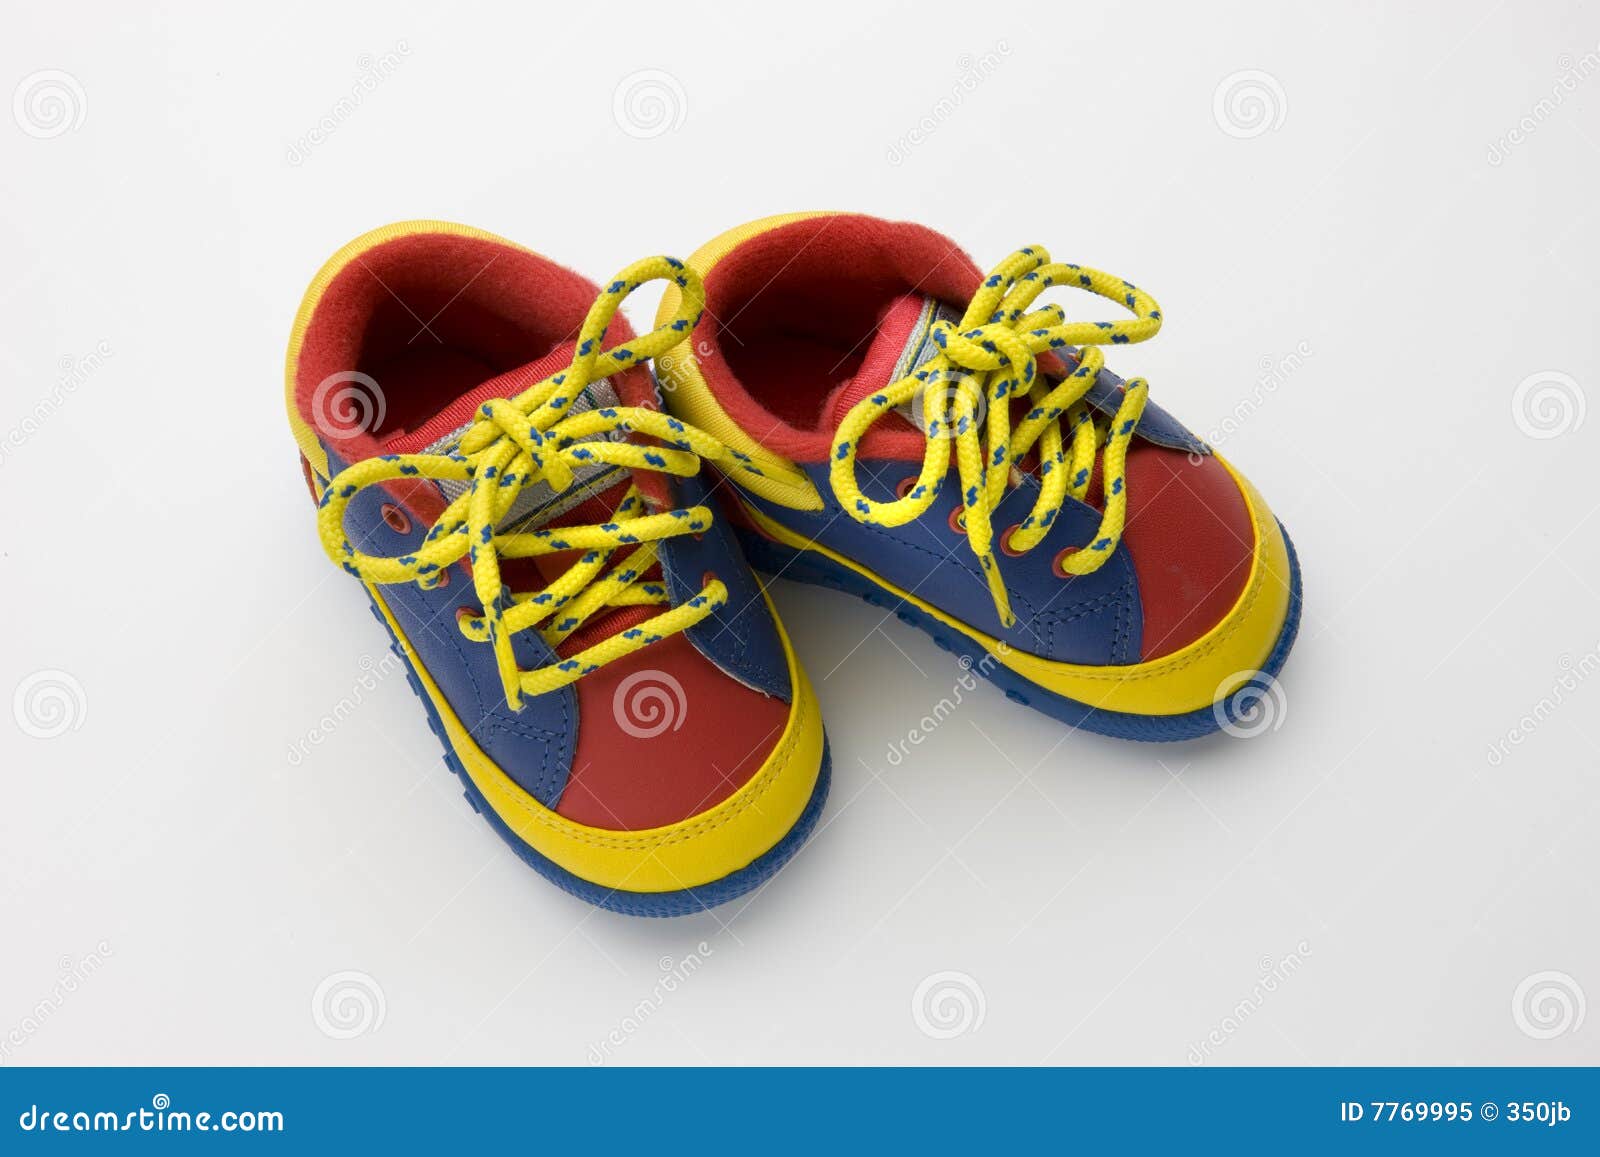 Colorful baby shoes stock image. Image of closeup, newborn - 7769995